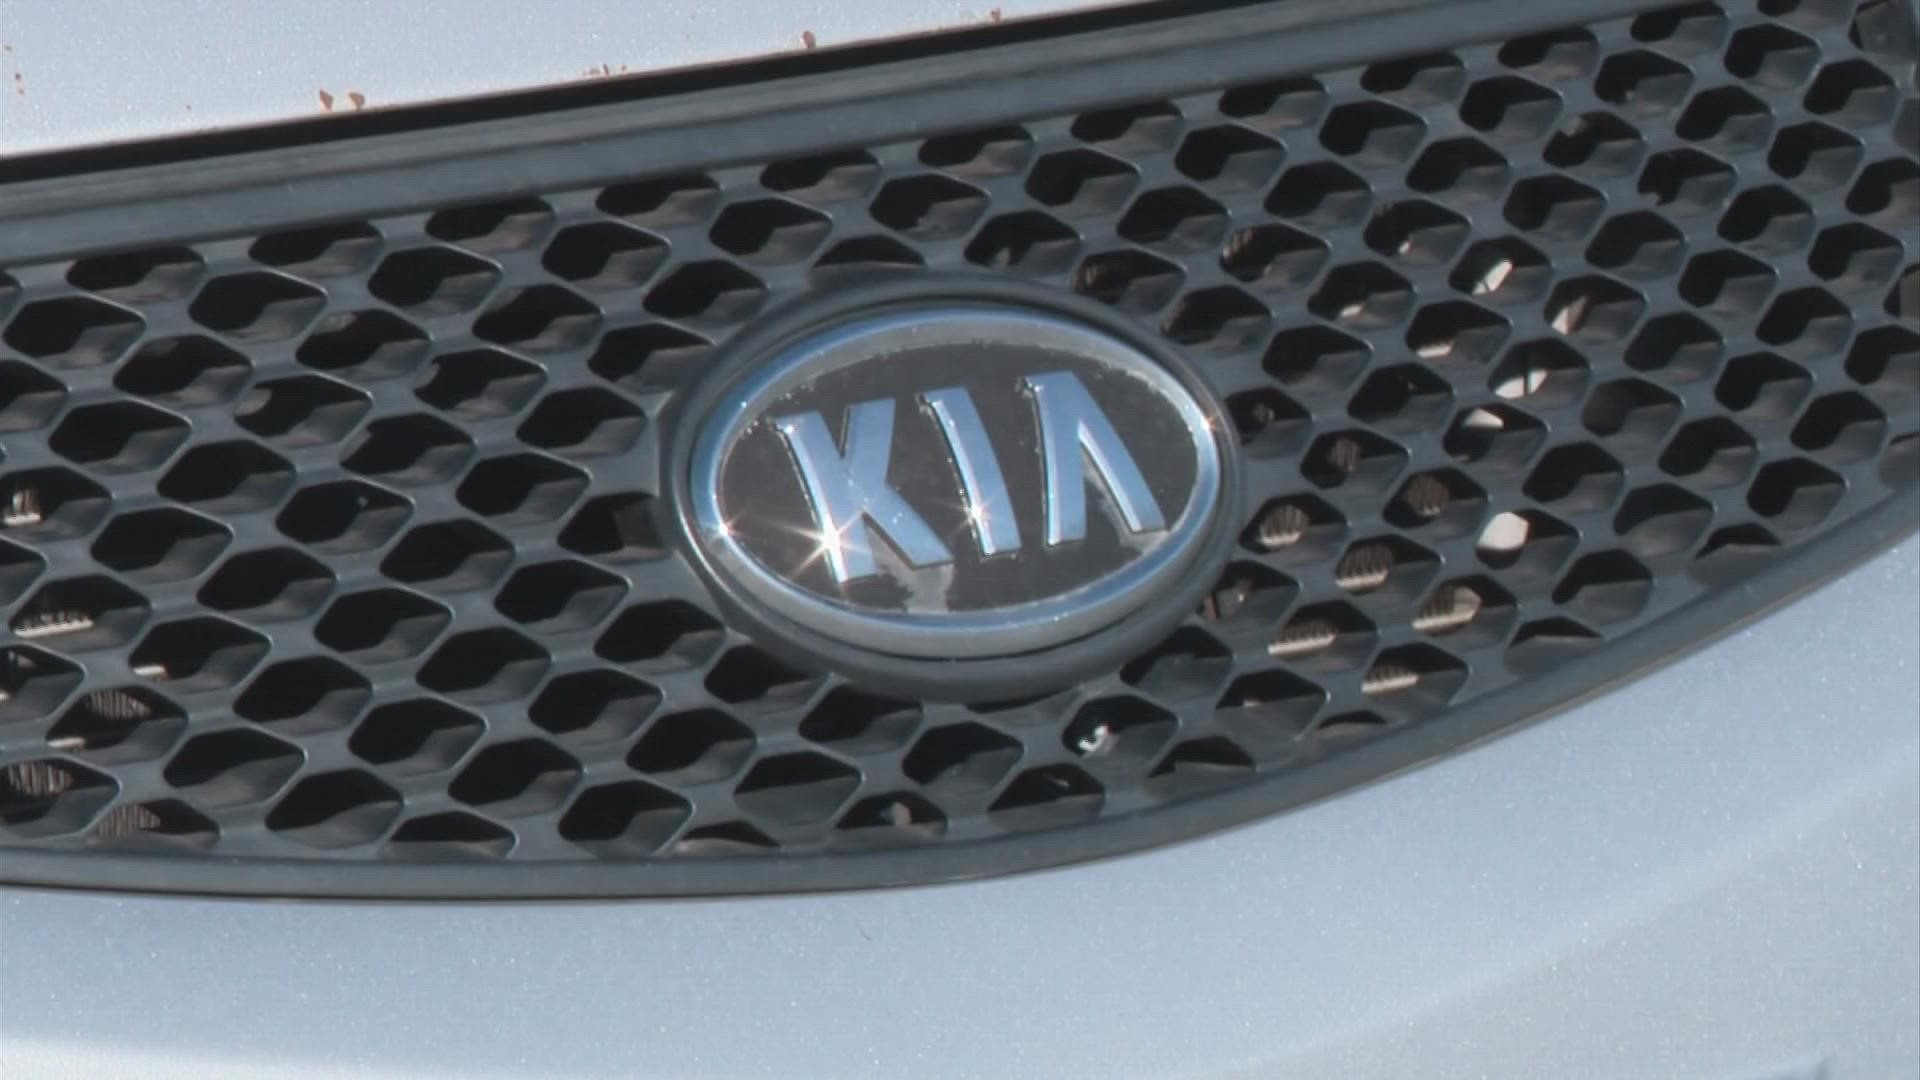 The group was created specifically for Kia and Hyundai owners. Crimetracker 10 has been reporting for months about the jump in thefts of those types of cars.